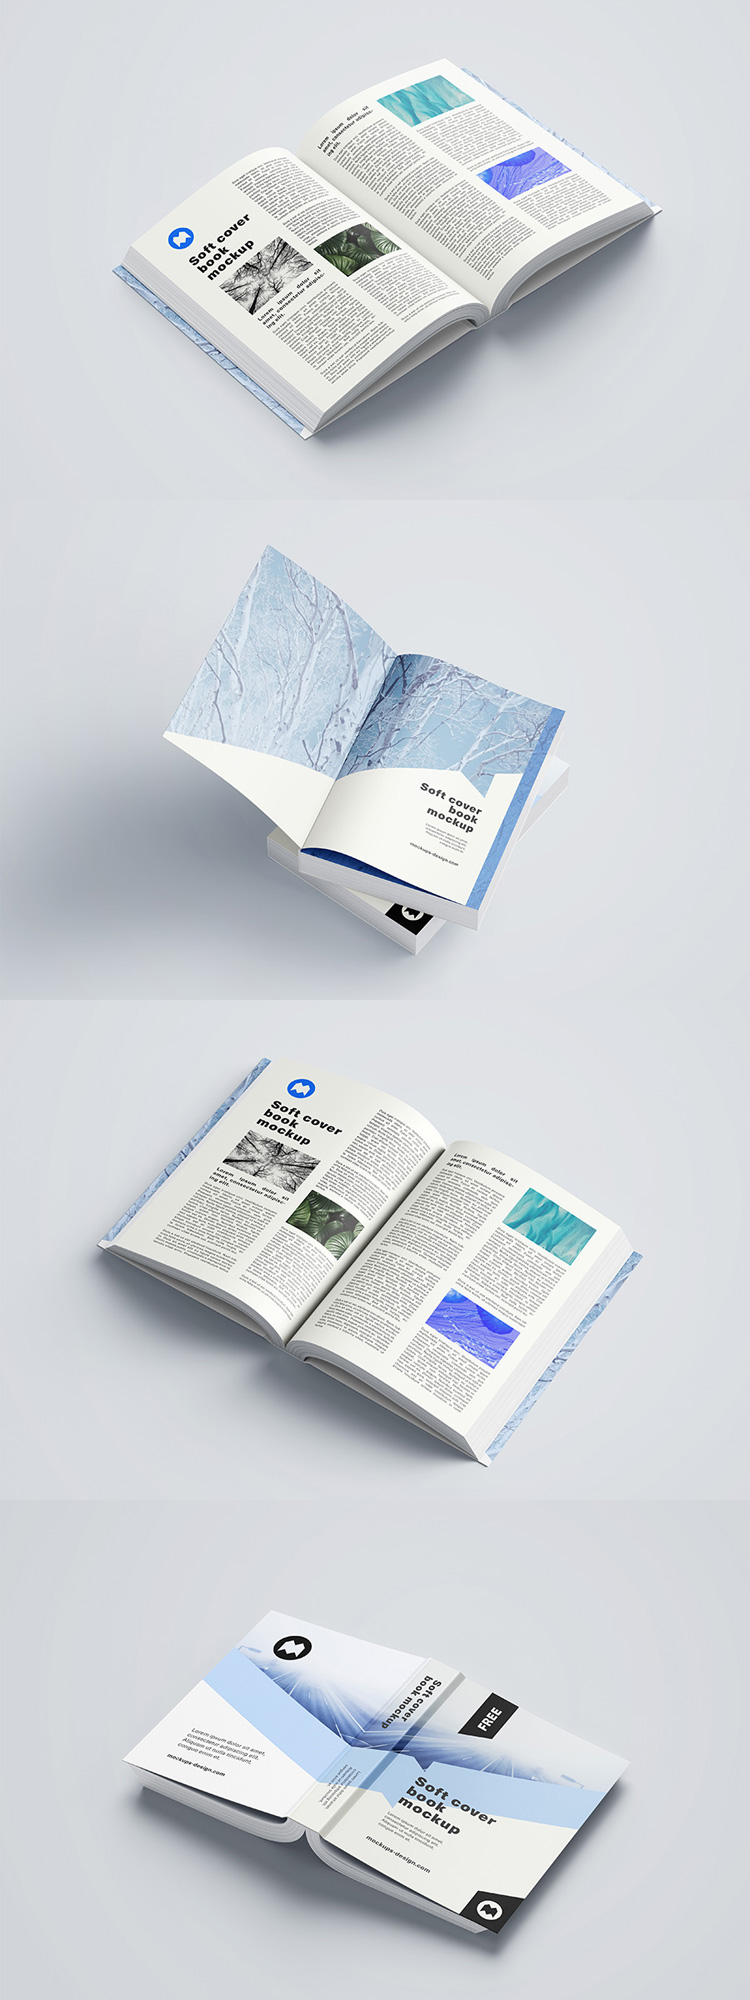 Download Free Softcover Book Mockup Find The Perfect Creative Mockups Freebies To Showcase Your Project To Life PSD Mockup Templates